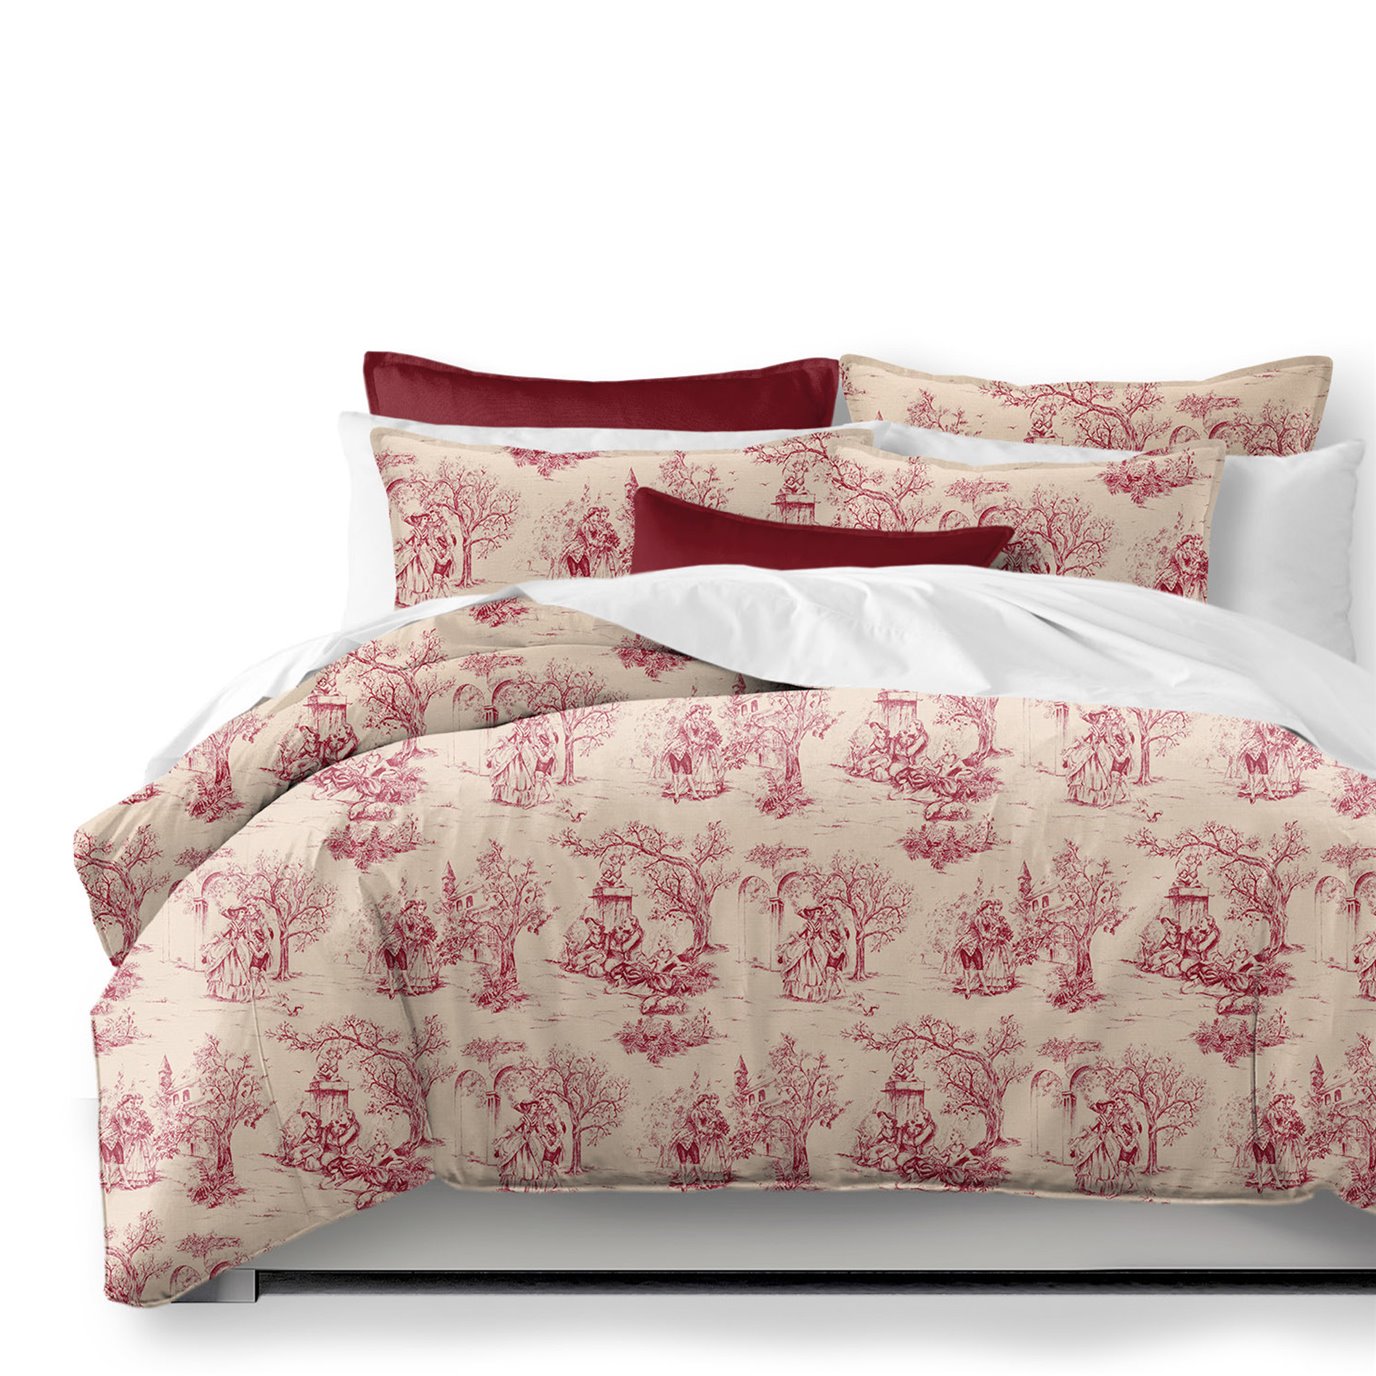 Archamps Toile Red Comforter and Pillow Sham(s) Set - Size King / California King